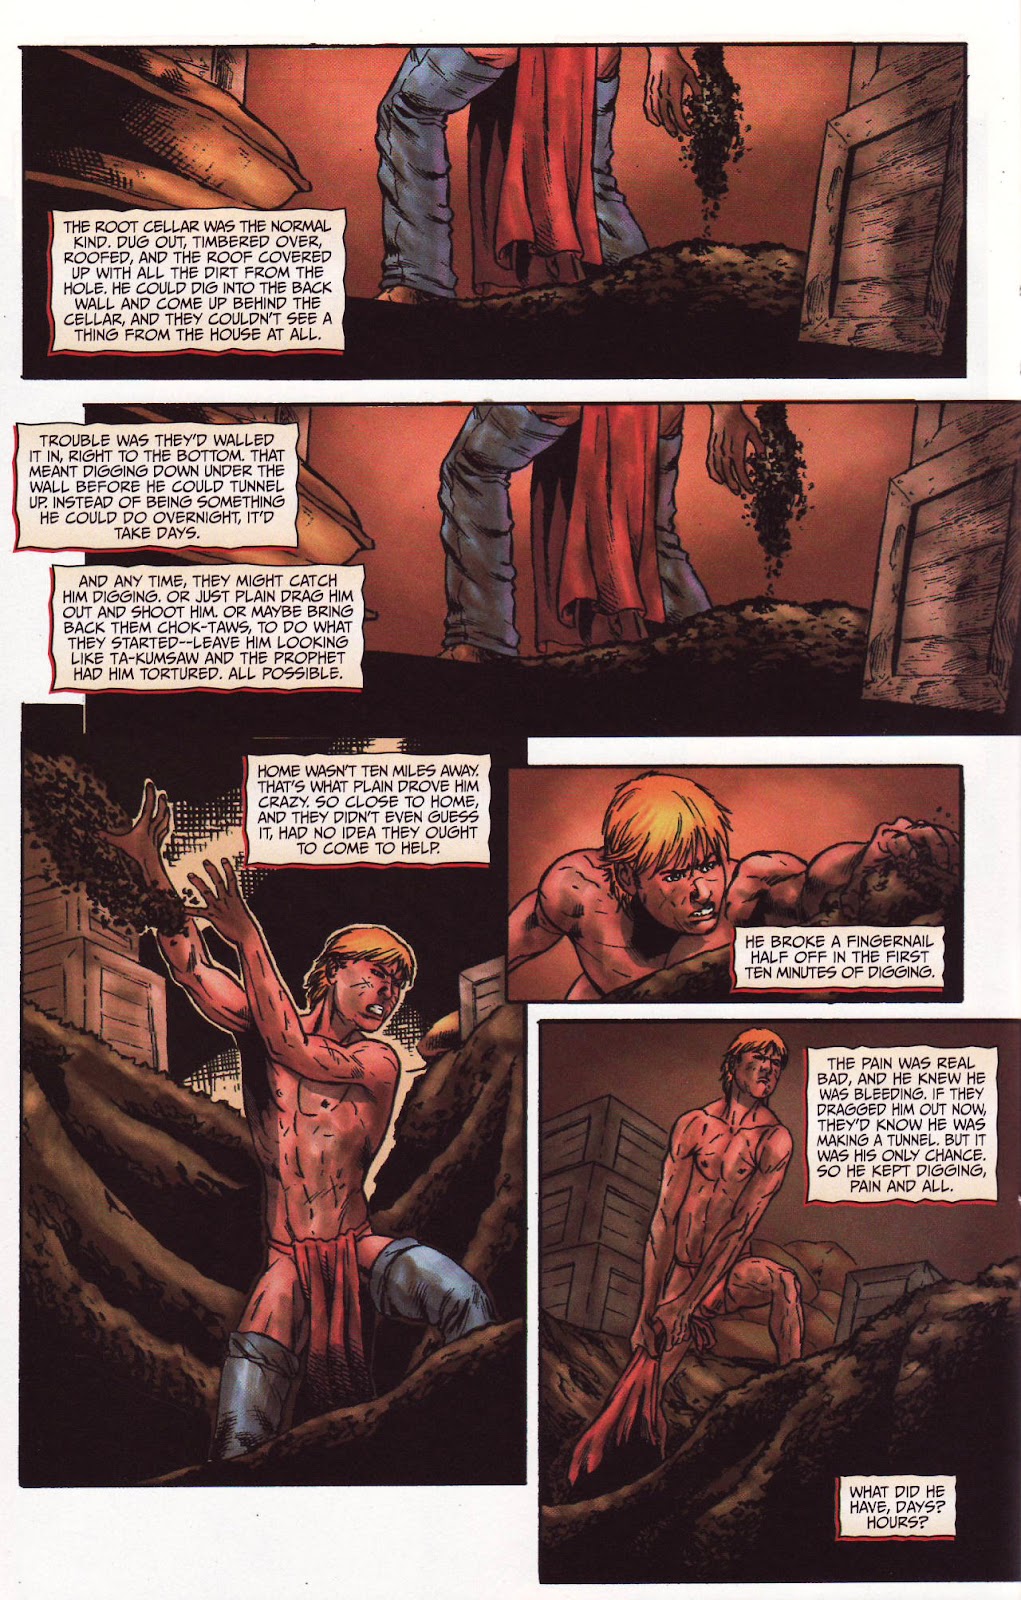 Red Prophet: The Tales of Alvin Maker issue 8 - Page 14